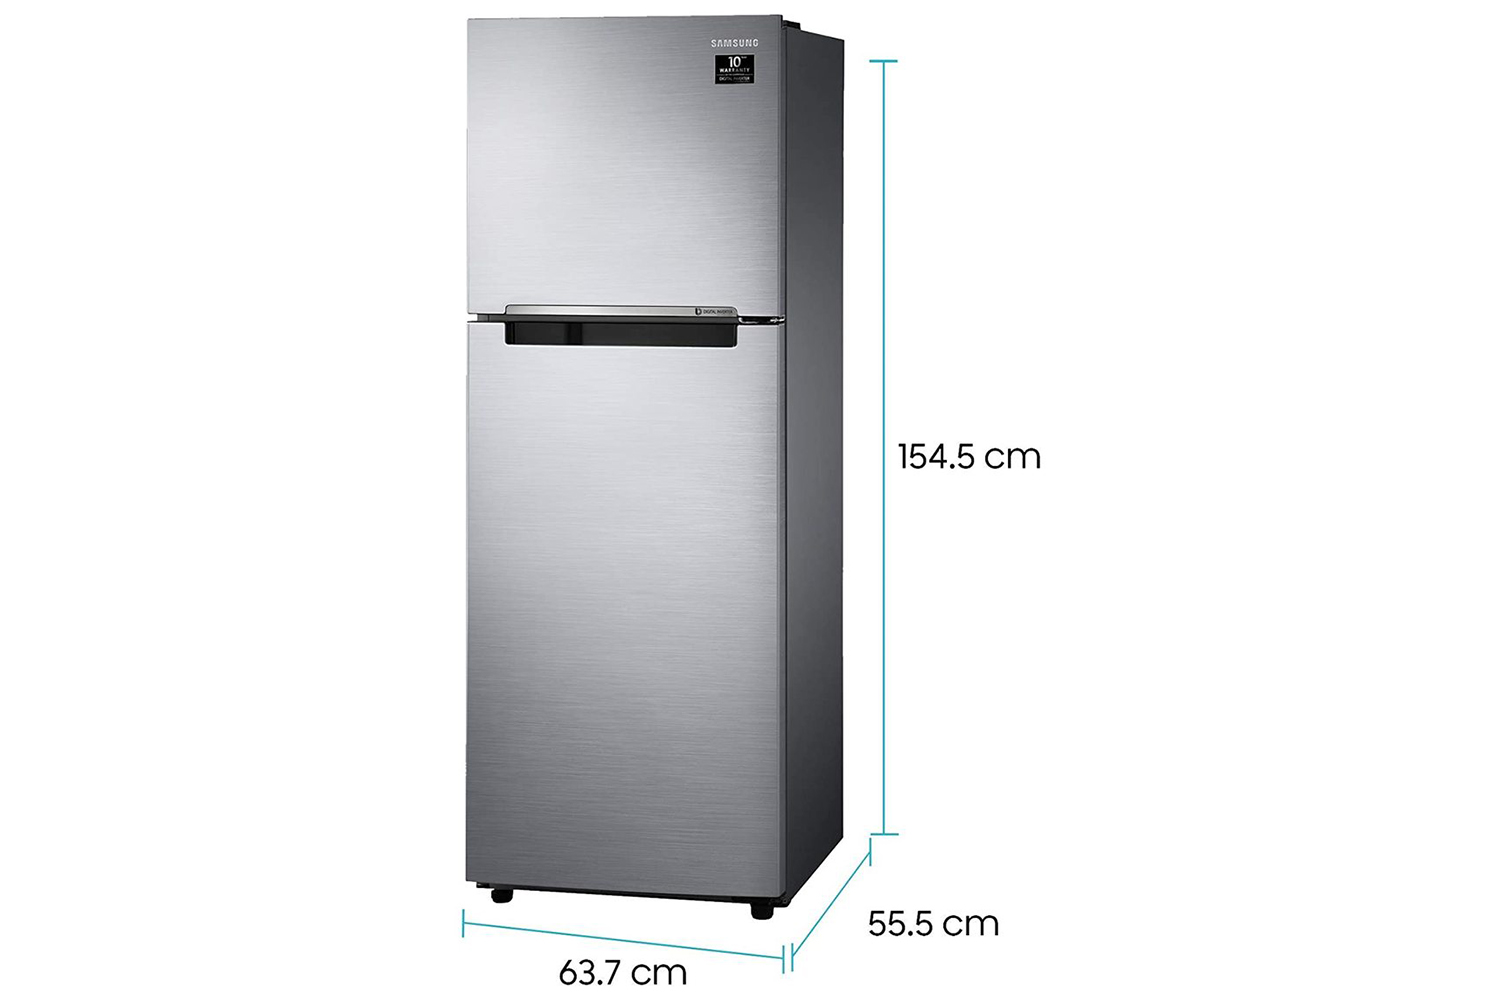 Samsung 253 L 2 Star RT28A3022GS/NL Inverter Frost-Free Double Door Refrigerator ( Grey Silver)